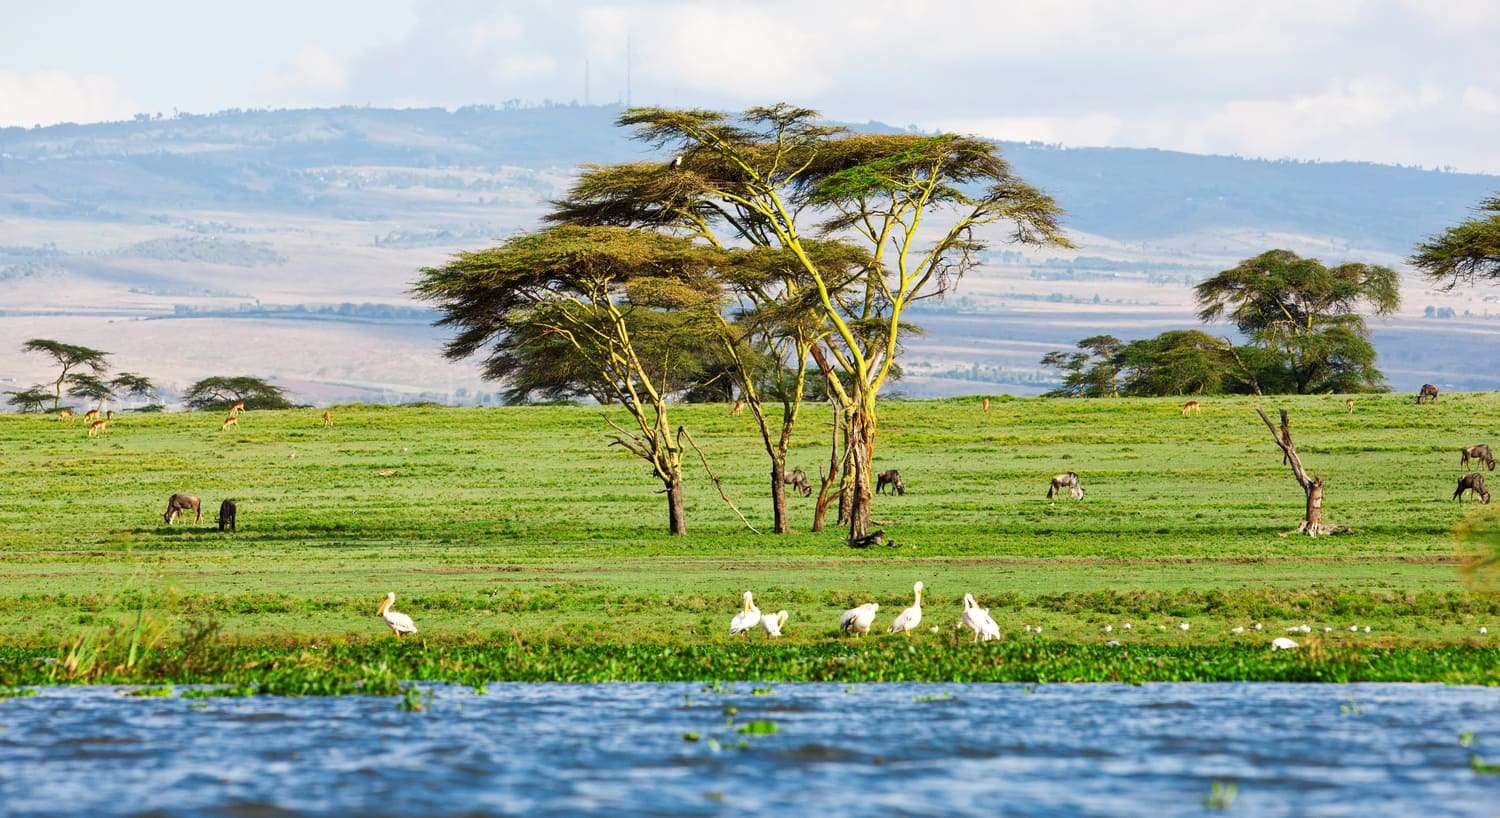 Kenya Safaris: The finest safaris and excursions to Kenya involve seeing the Big 5, admiring the scenery, learning about the local culture